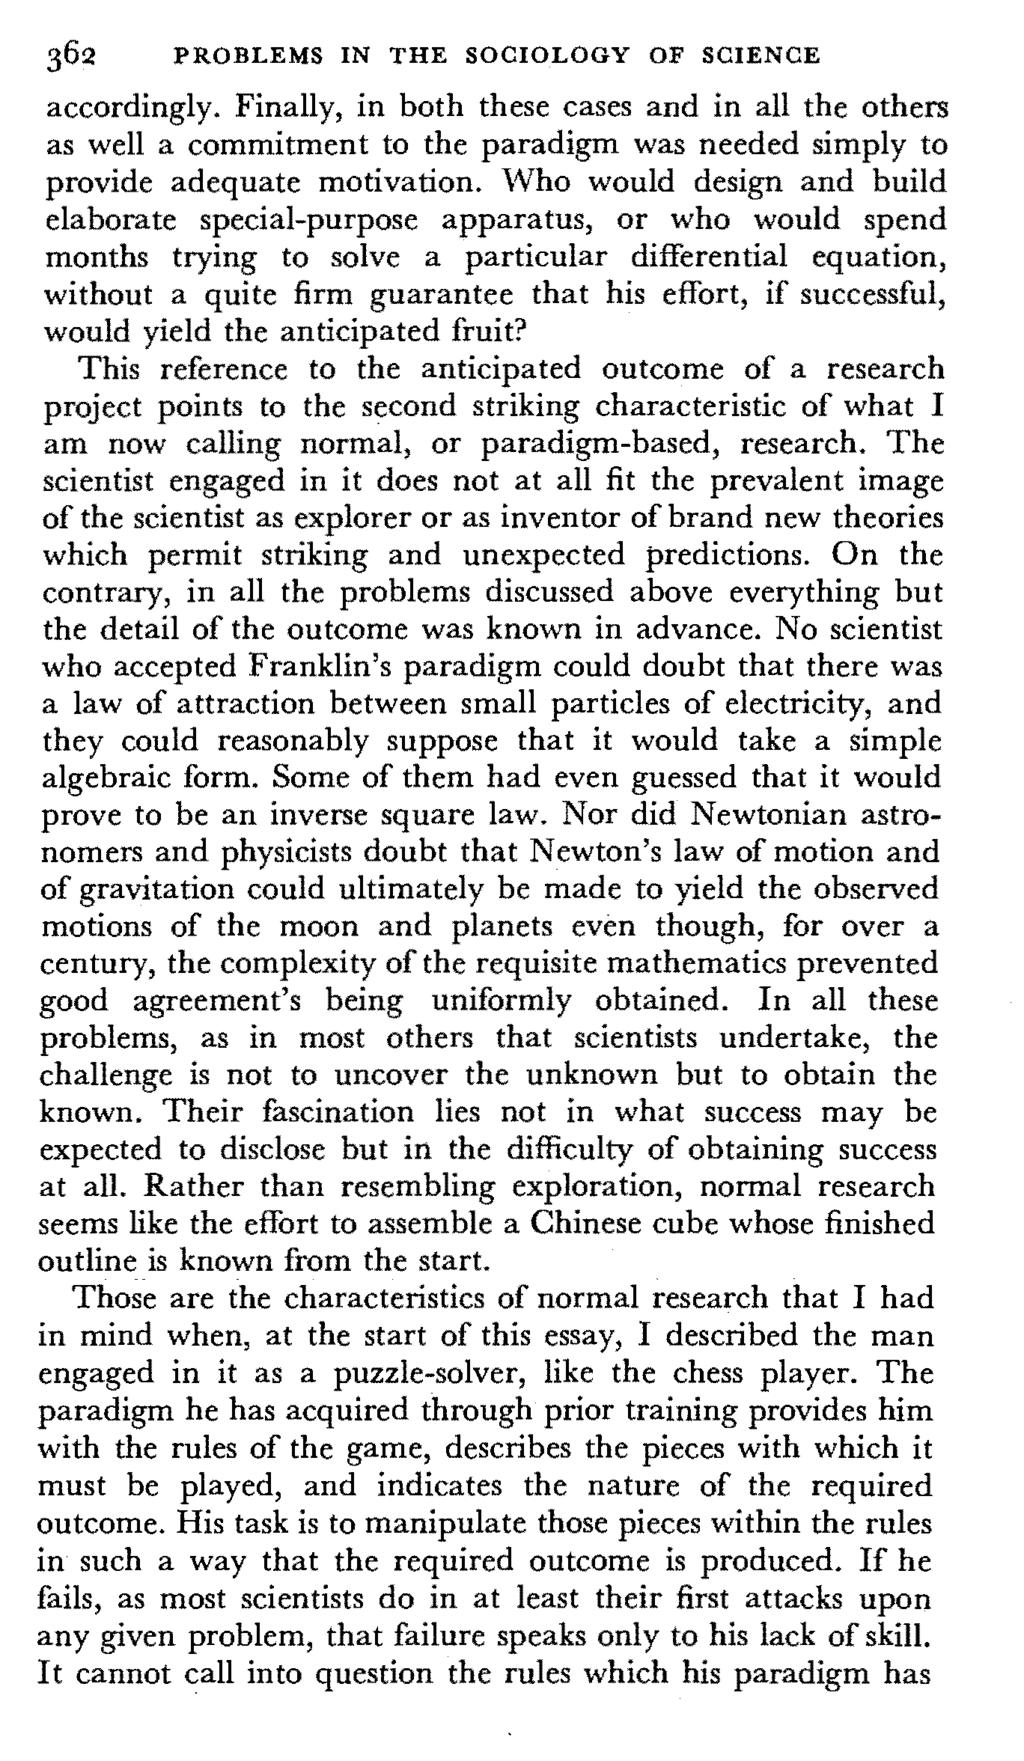 362 PROBLEMS IN THE SOCIOLOGY OF SCIENCE accordingly. Finally, in both these cases and in all the others as well a commitment to the paradigm was needed simply to provide adequate motivation.